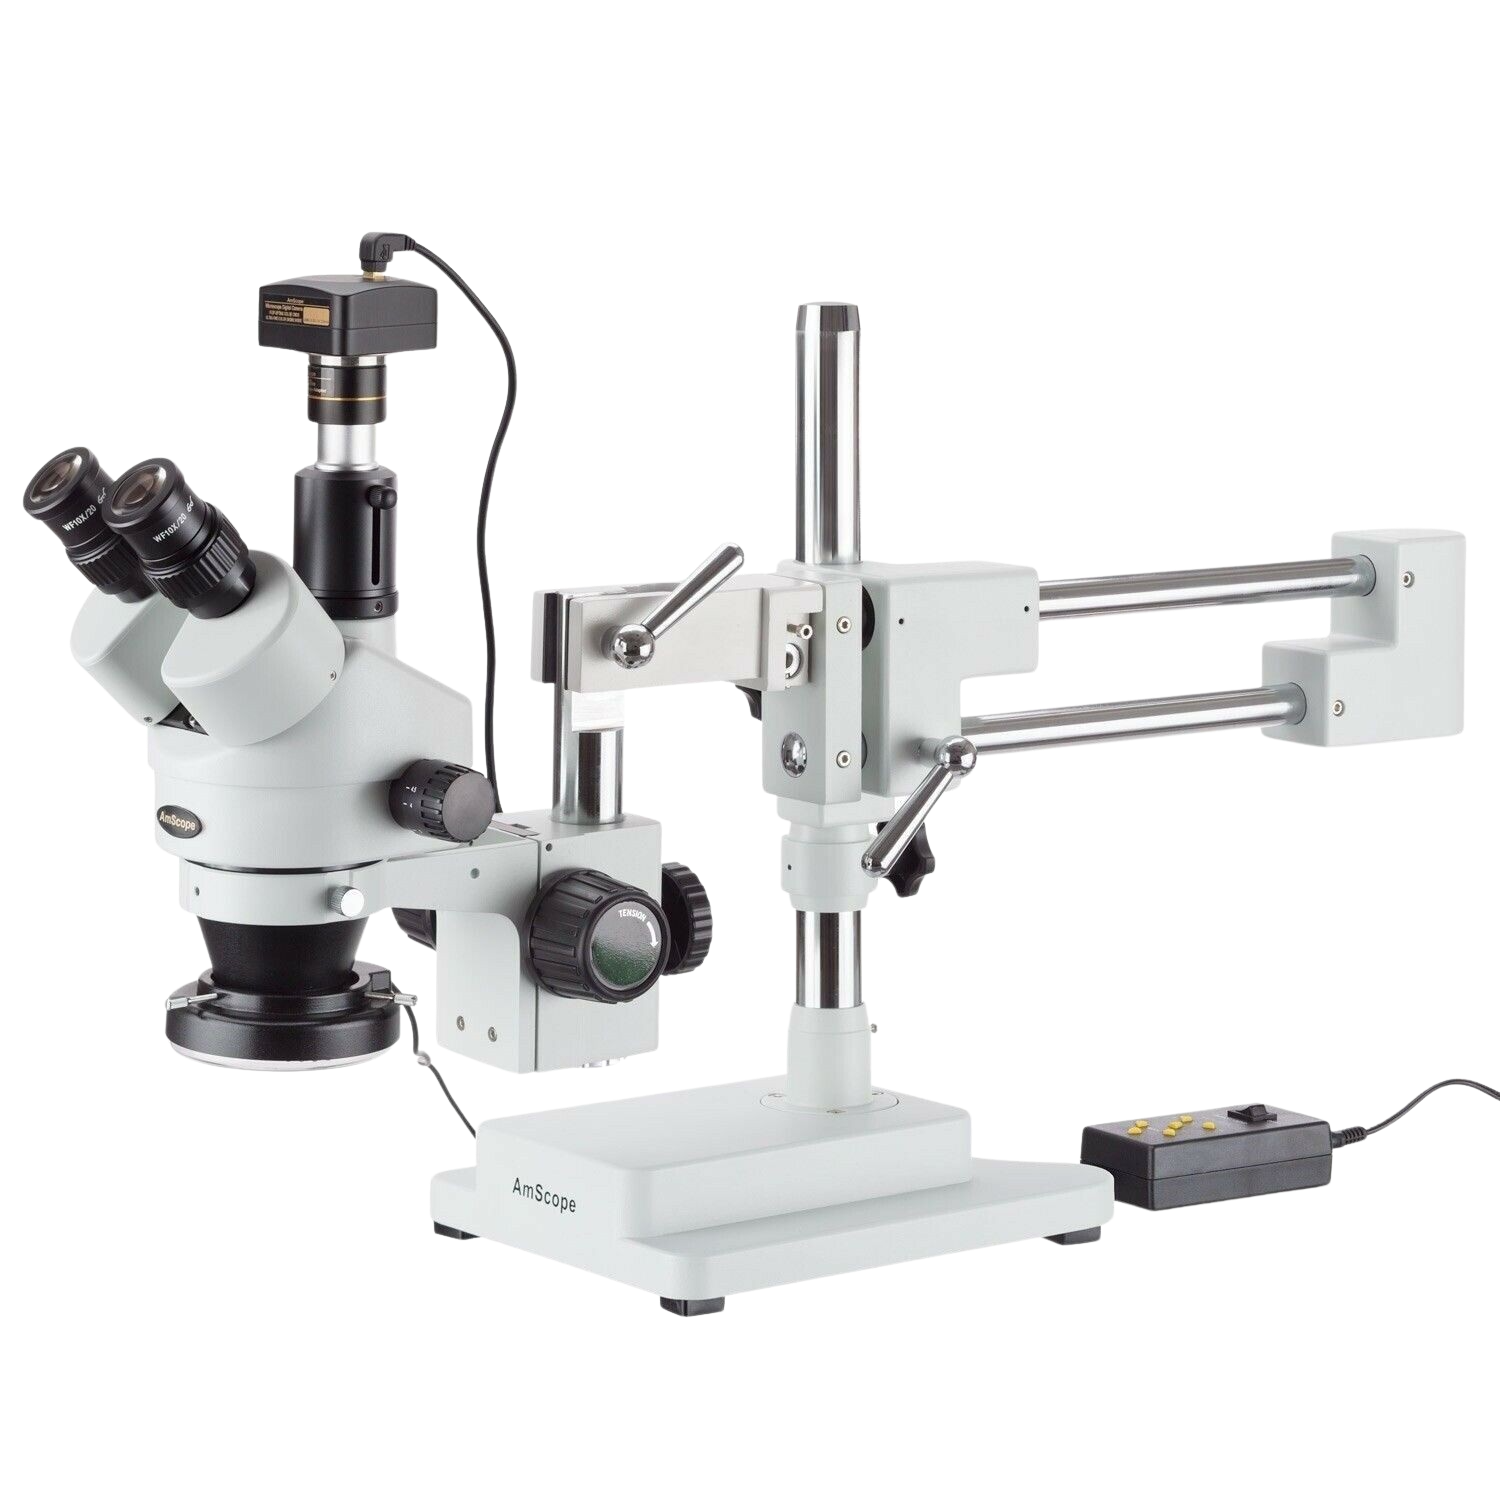 AmScope, Amscope SM-3TZ-144A-10M3 3.5X - 90X Trinocular Stereo Zoom Microscope 144 LED Ring Light and USB3.0 10MP Camera New